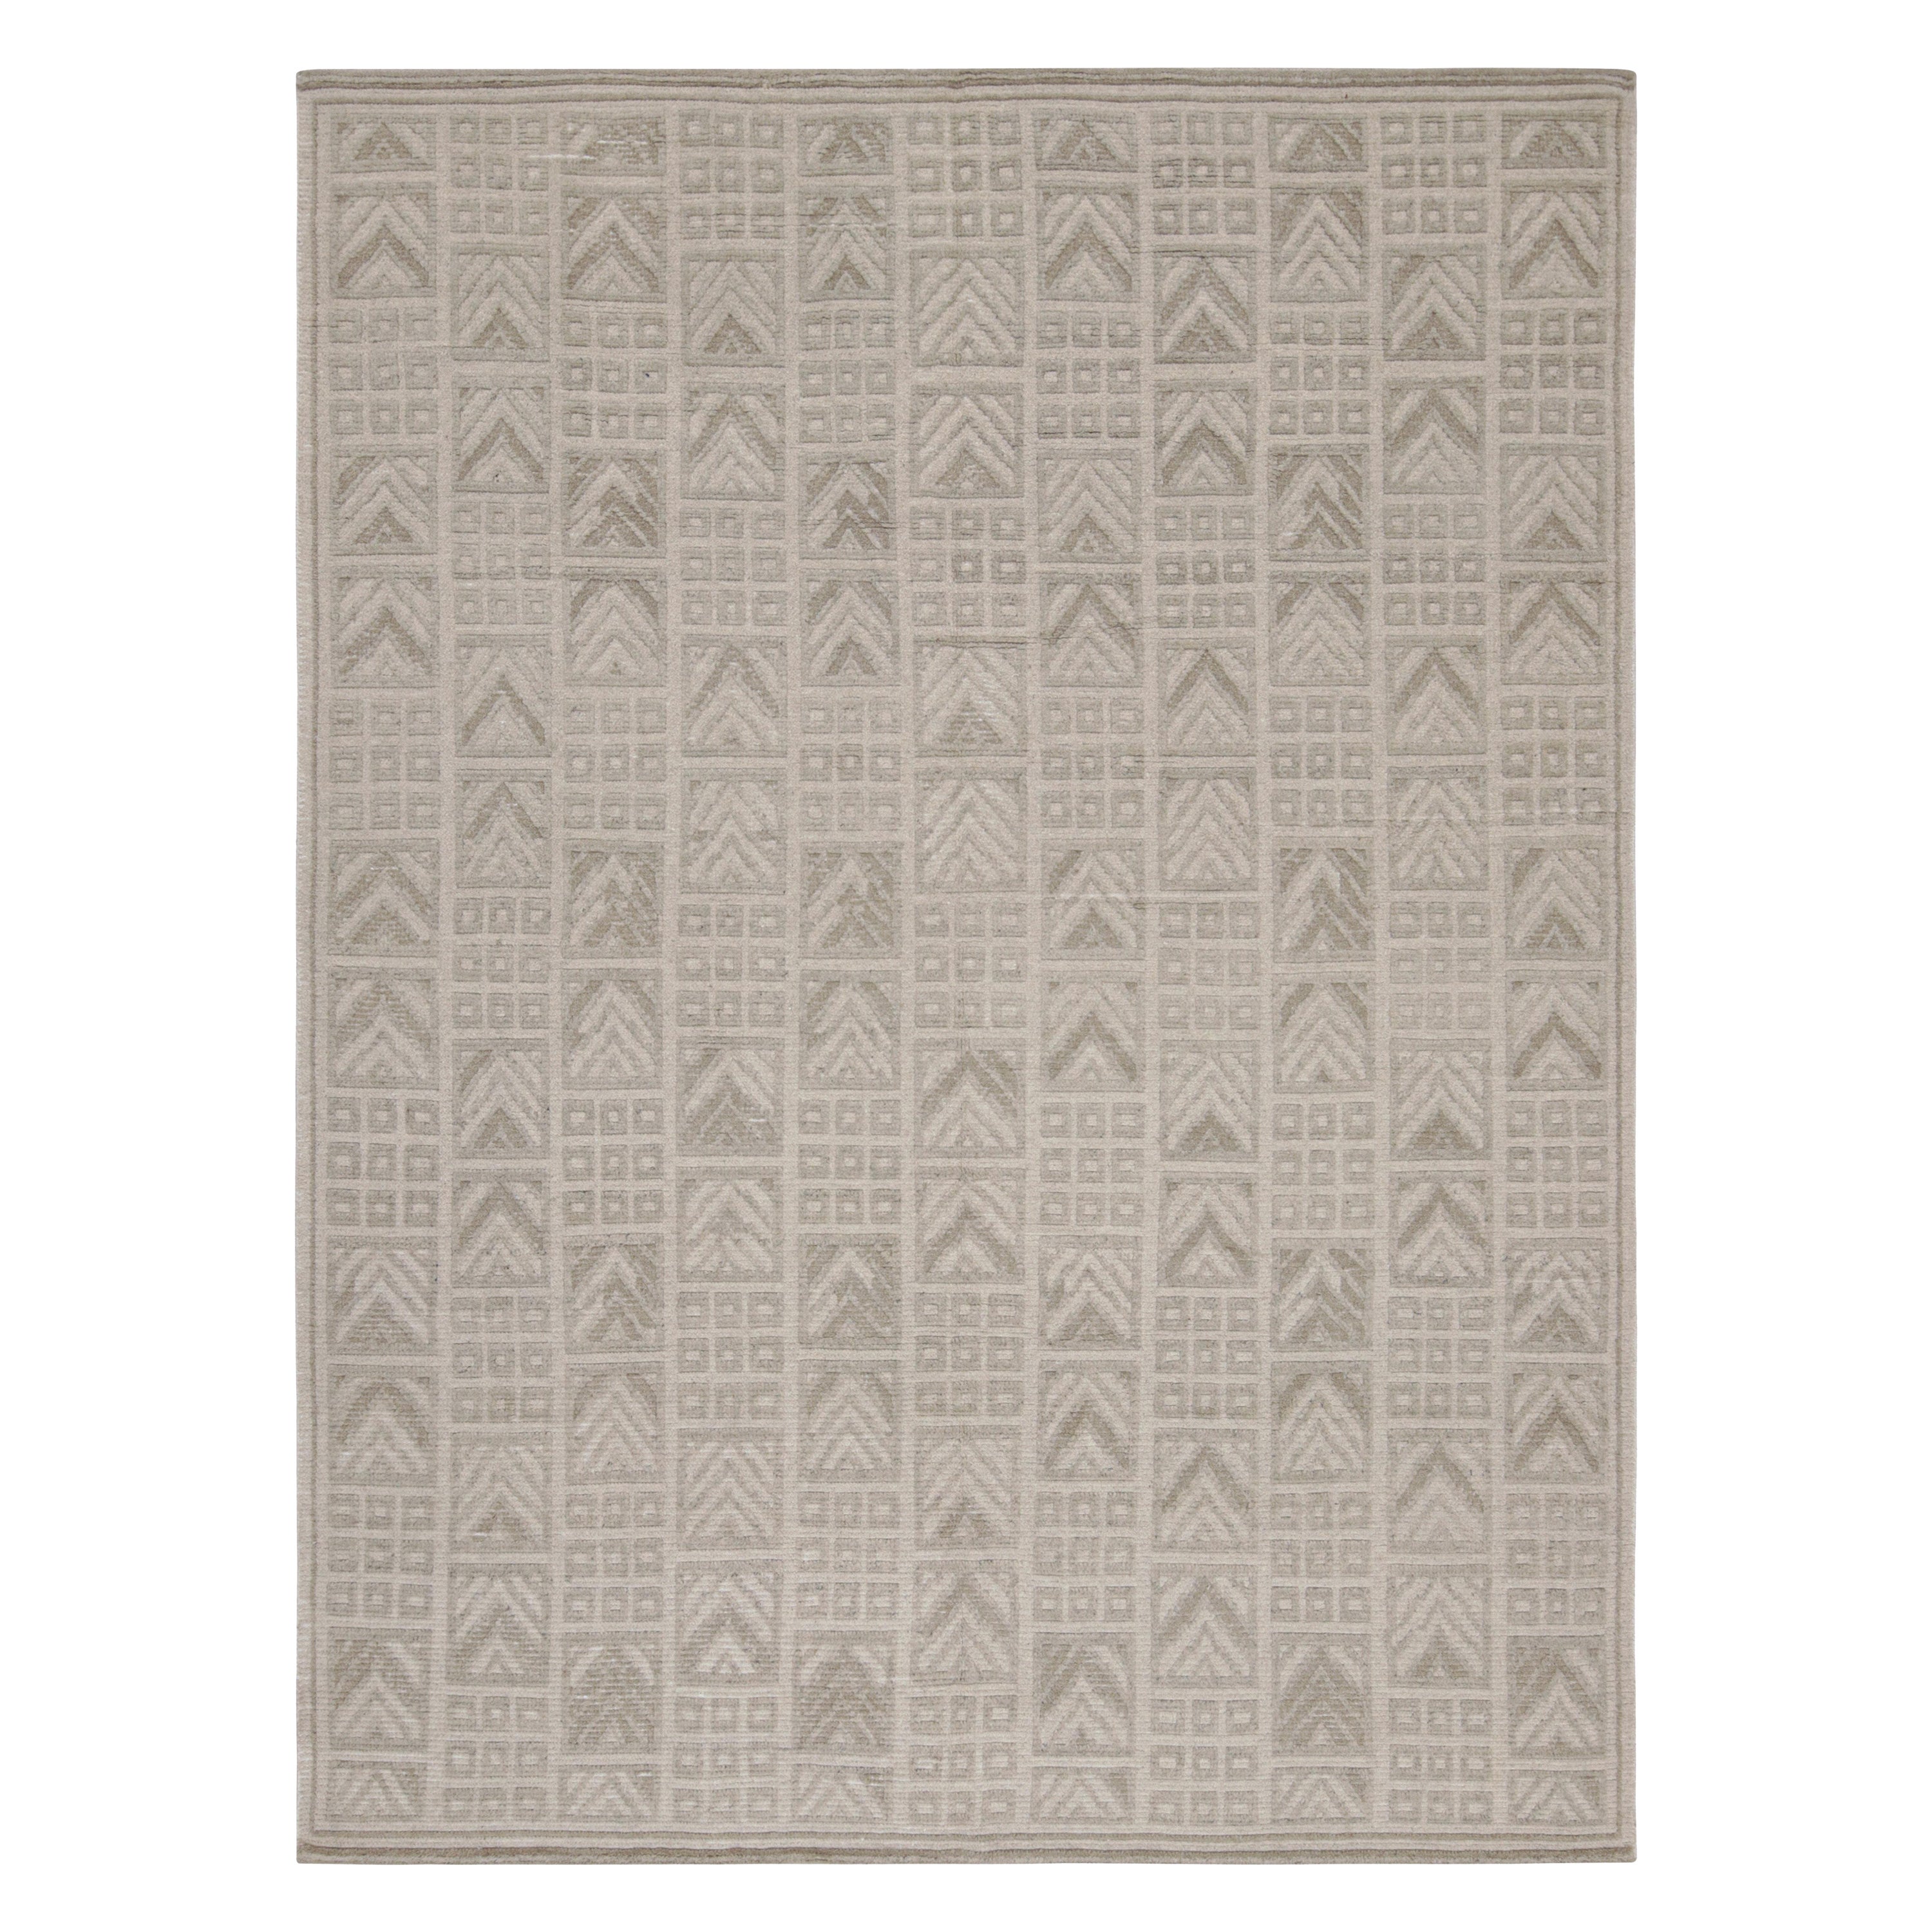 Rug & Kilim’s Scandinavian Style Rug with Beige and Gray Geometric Patterns